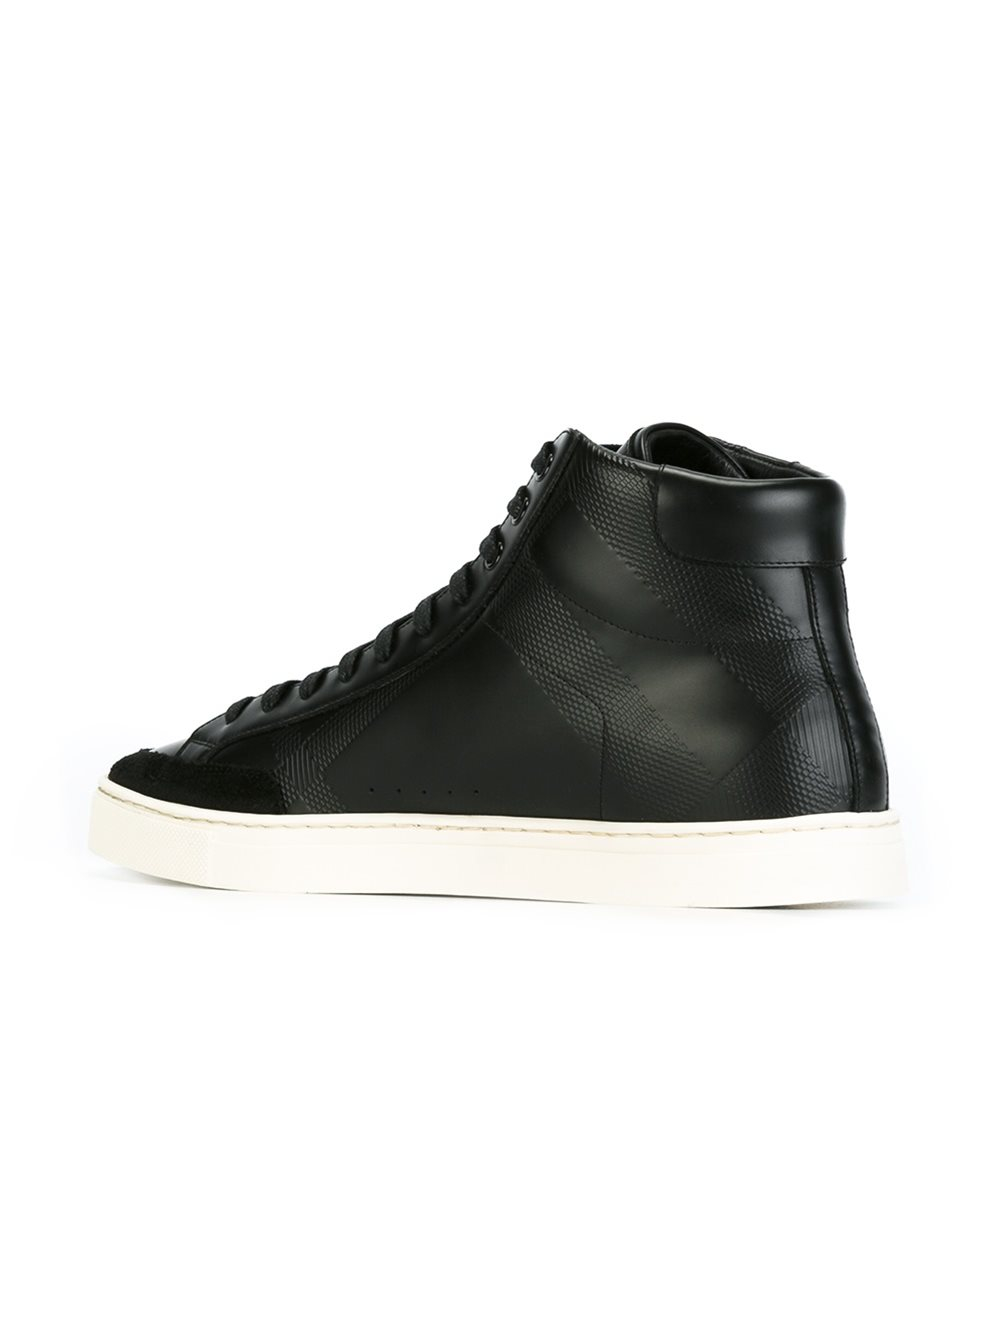 Lyst - Burberry High-Top Sneakers in Black for Men